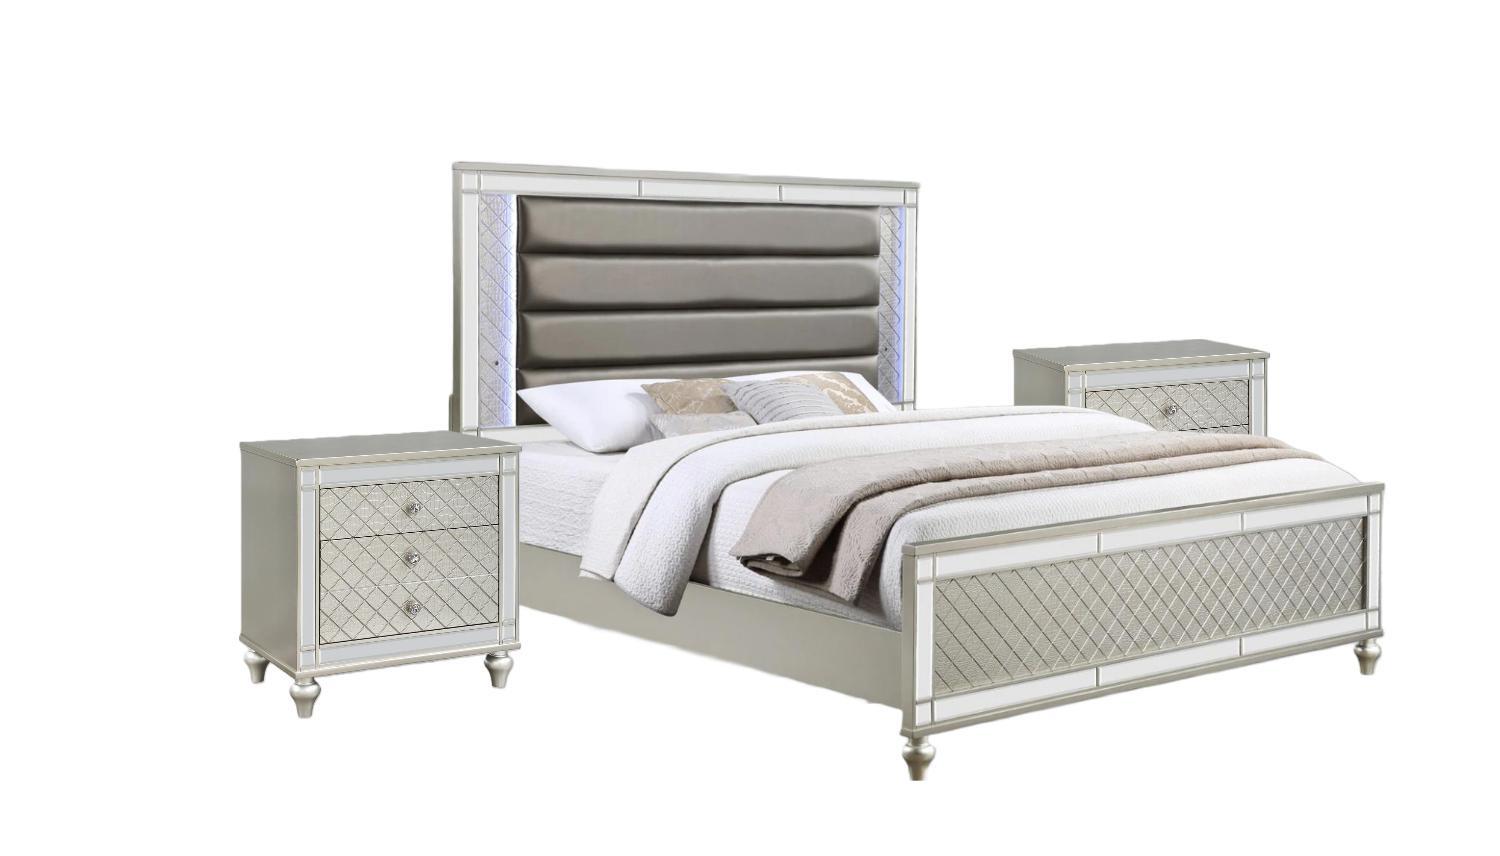 Modern Panel Bedroom Set Cristian B1680-Q-Bed-3pcs in White, Champagne Crocodile Texture